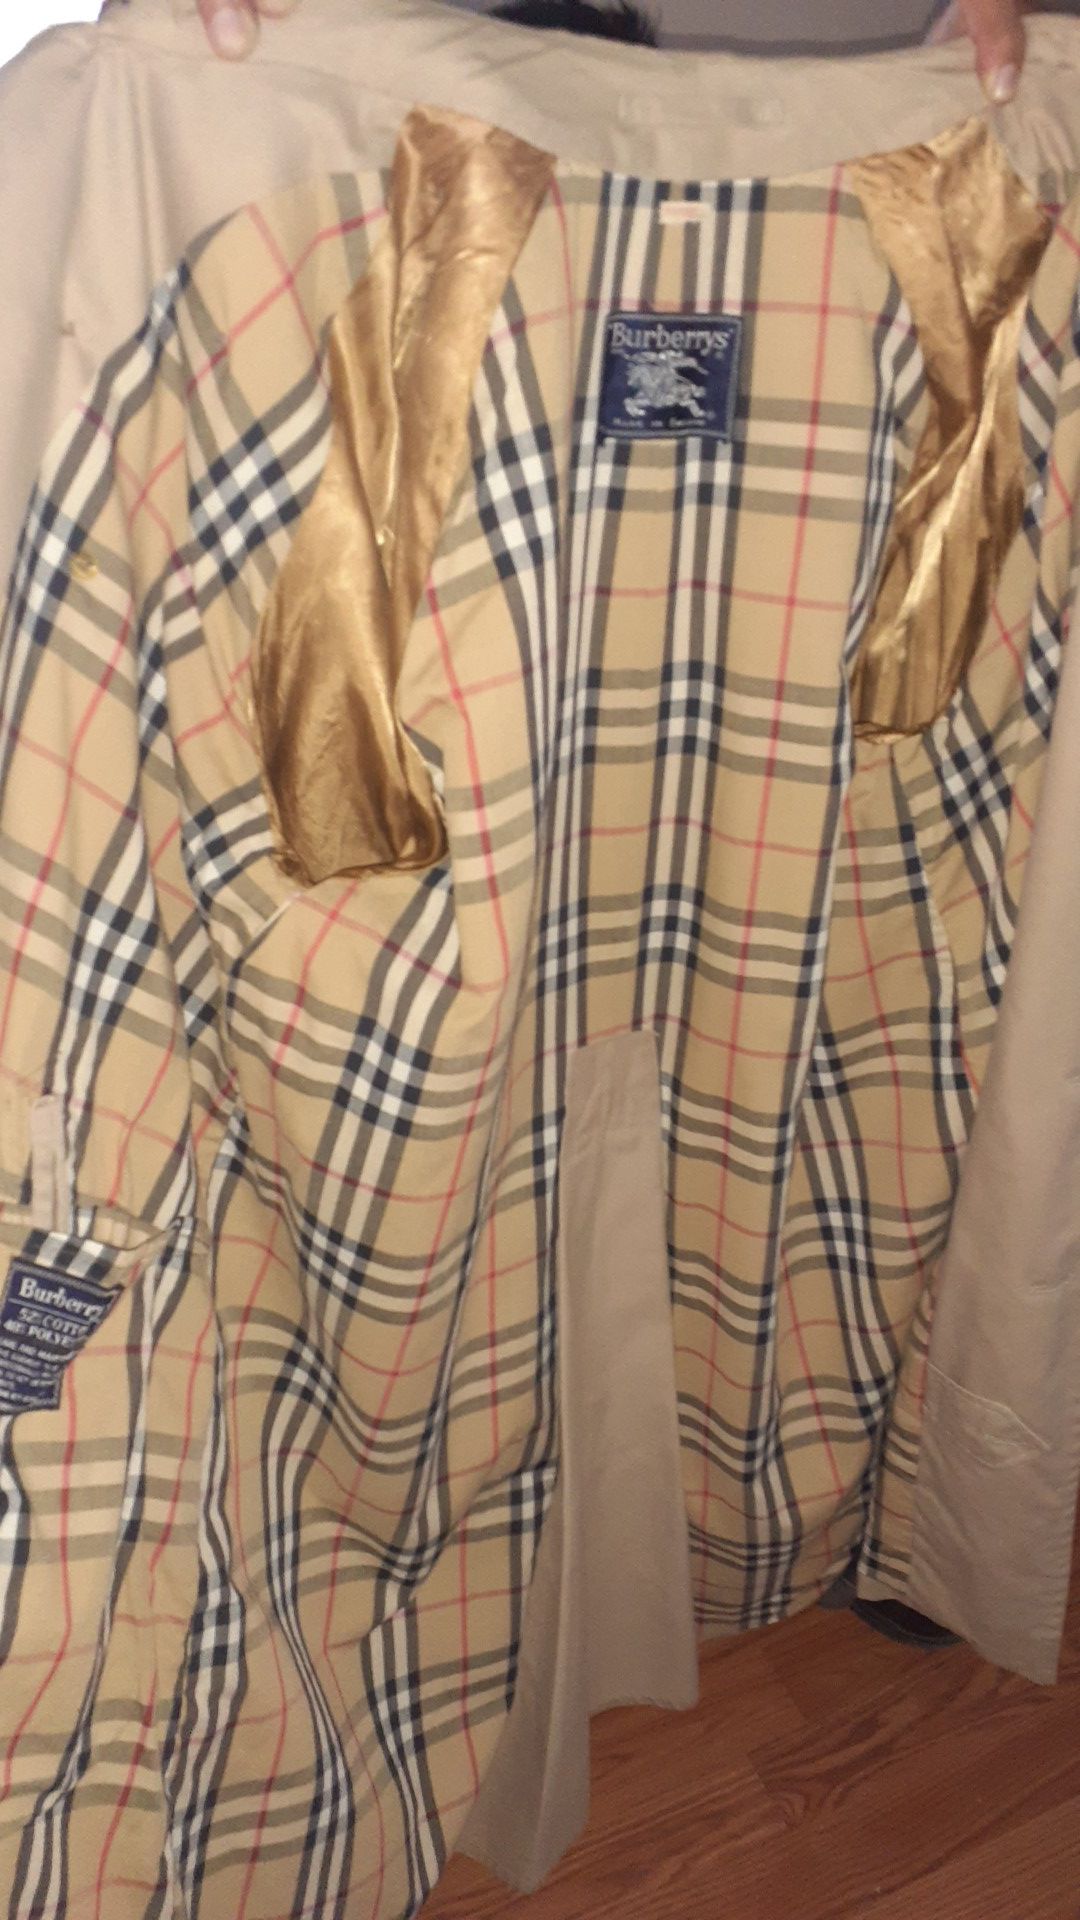 Mens Burberry trenchcoat size XL.